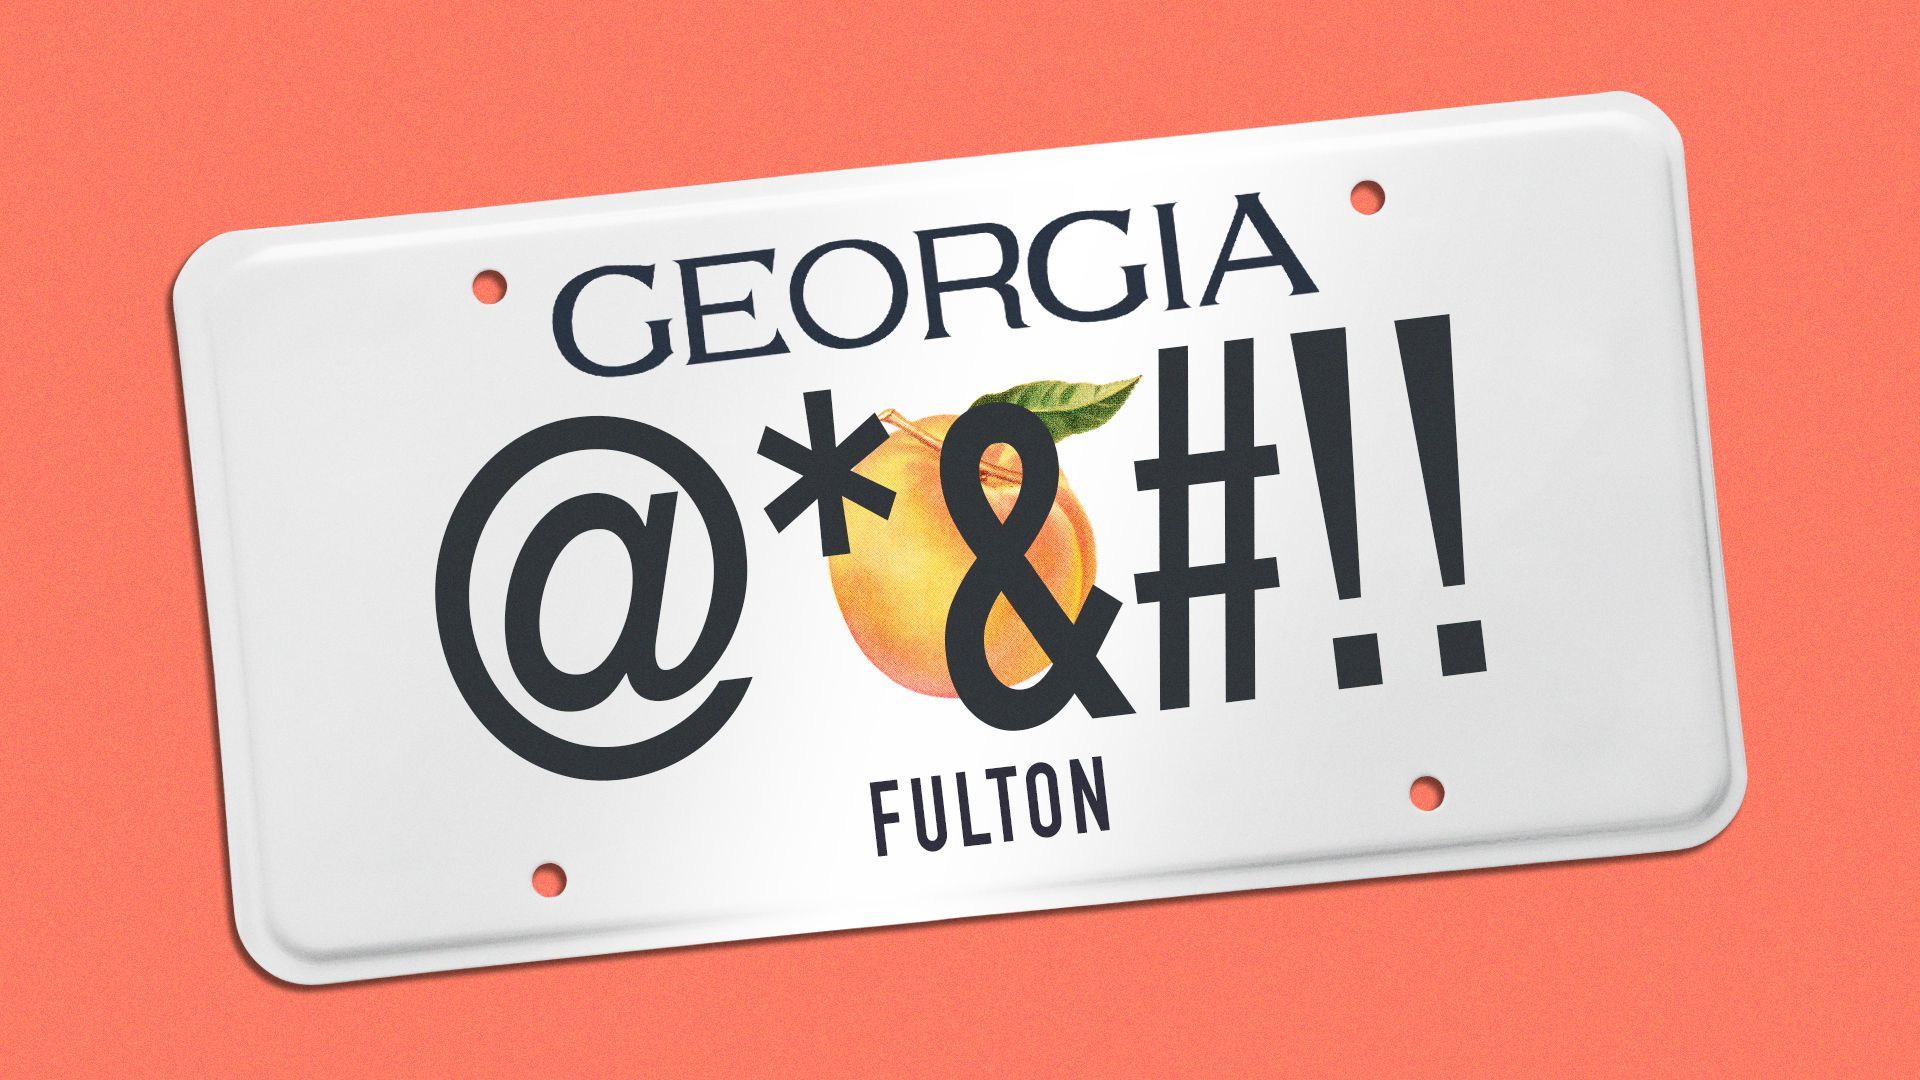 Illustration of a Georgia license plate with symbols implying a swear word.